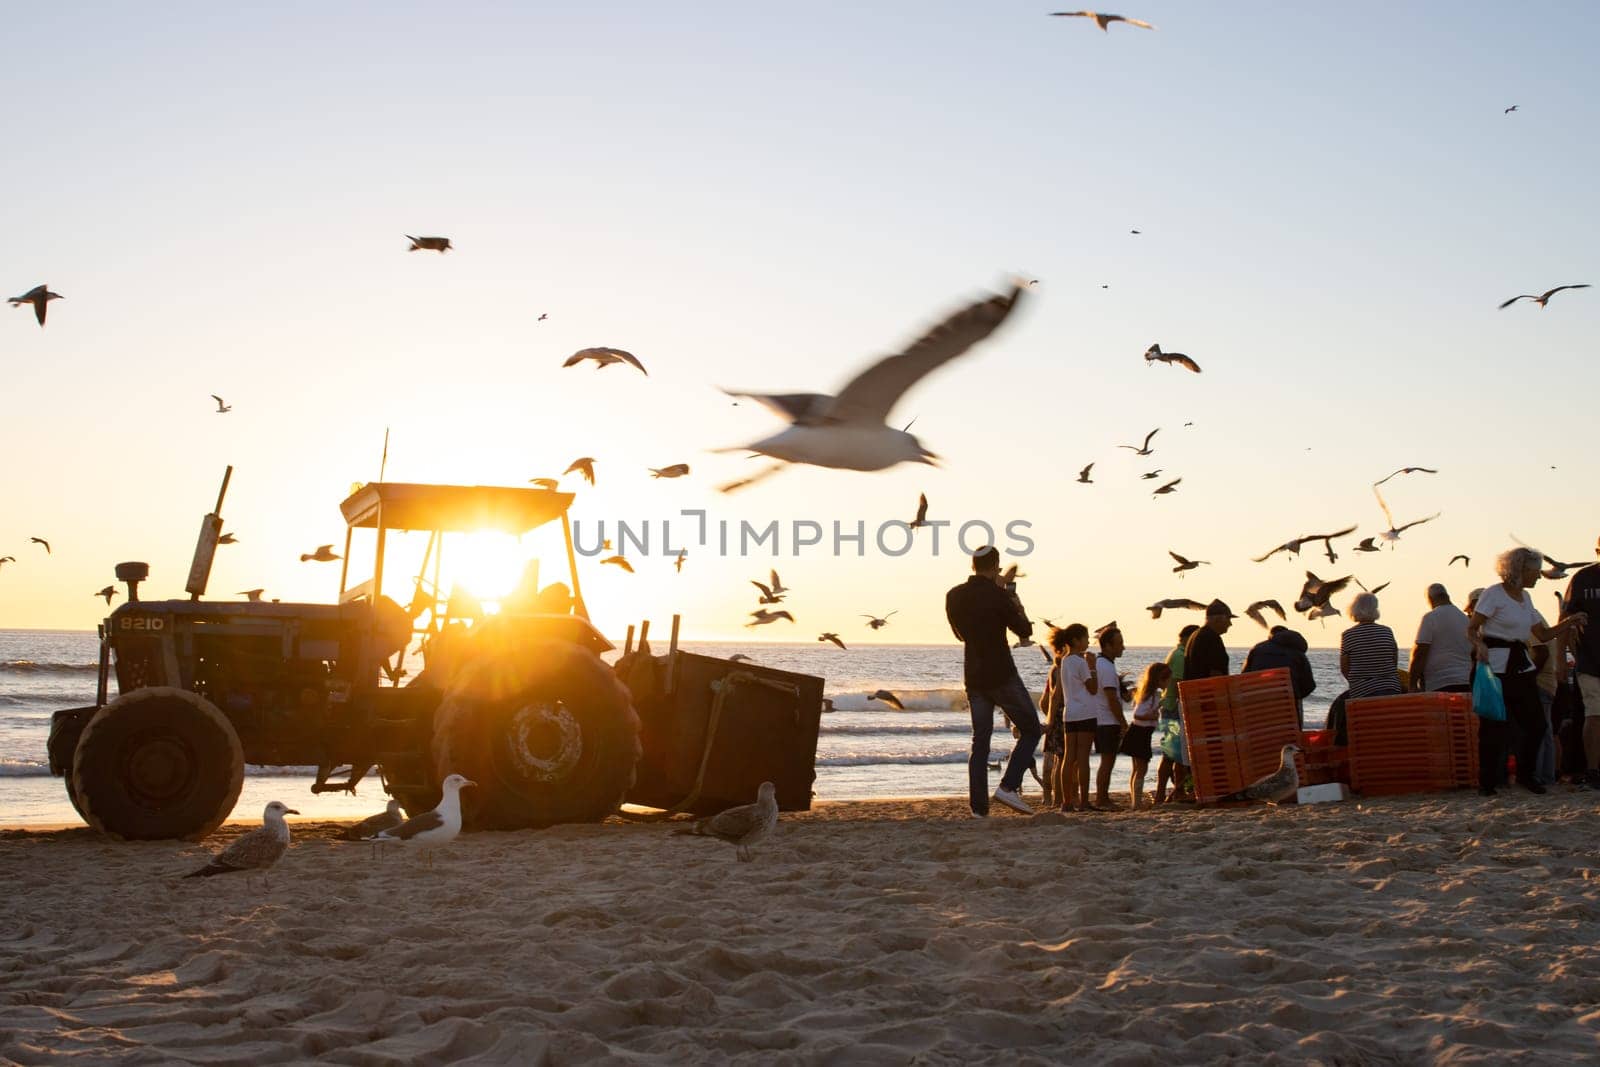 14 october 2022 Lisbon, Portugal: Men and women are selling freshly caught fish on the beach at bright sunset by Studia72